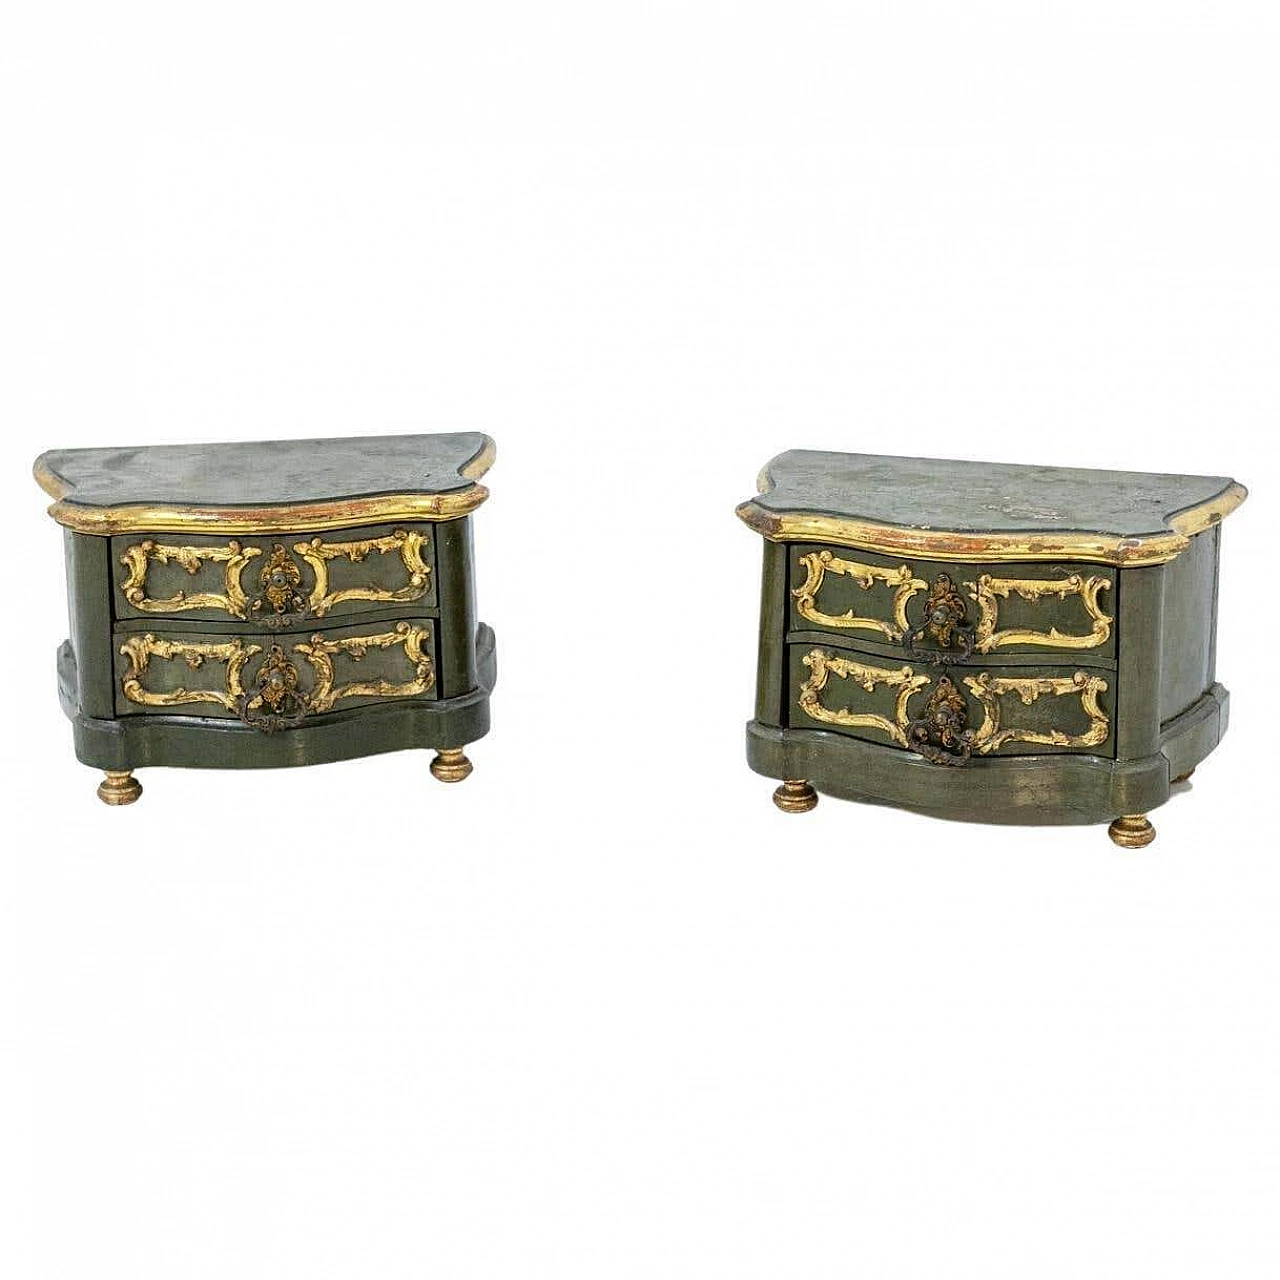 Pair of gold-lacquered wooden bedside cabinets, 18th century 1